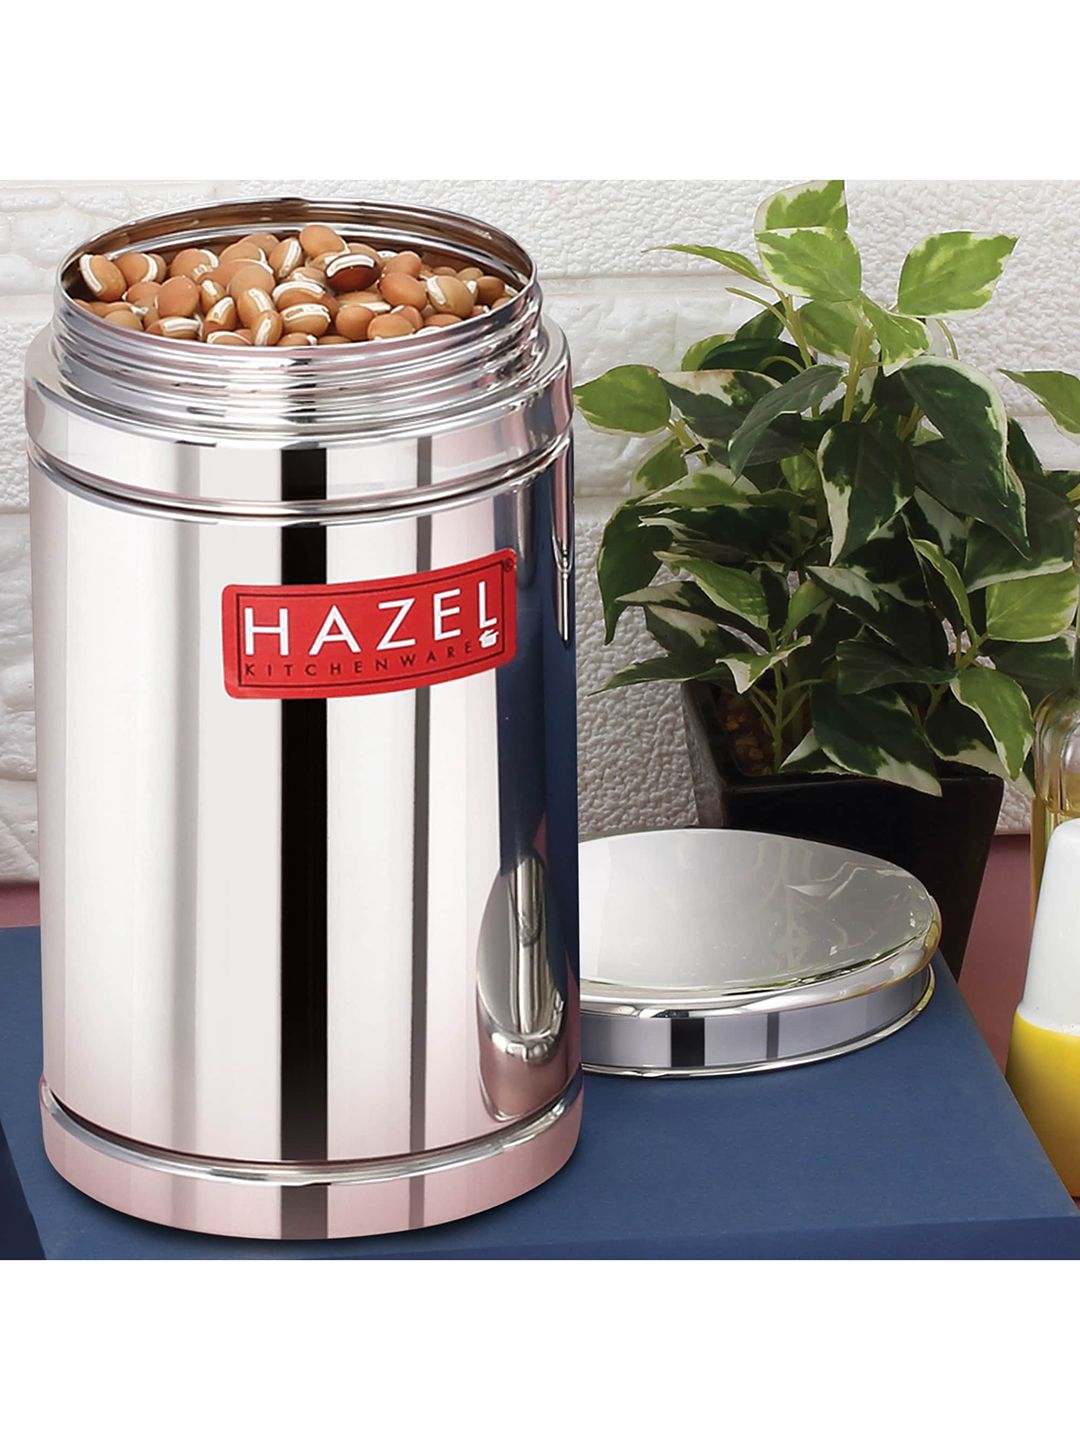 HAZEL Silver-Toned Solid Stainless Steel Containers Price in India